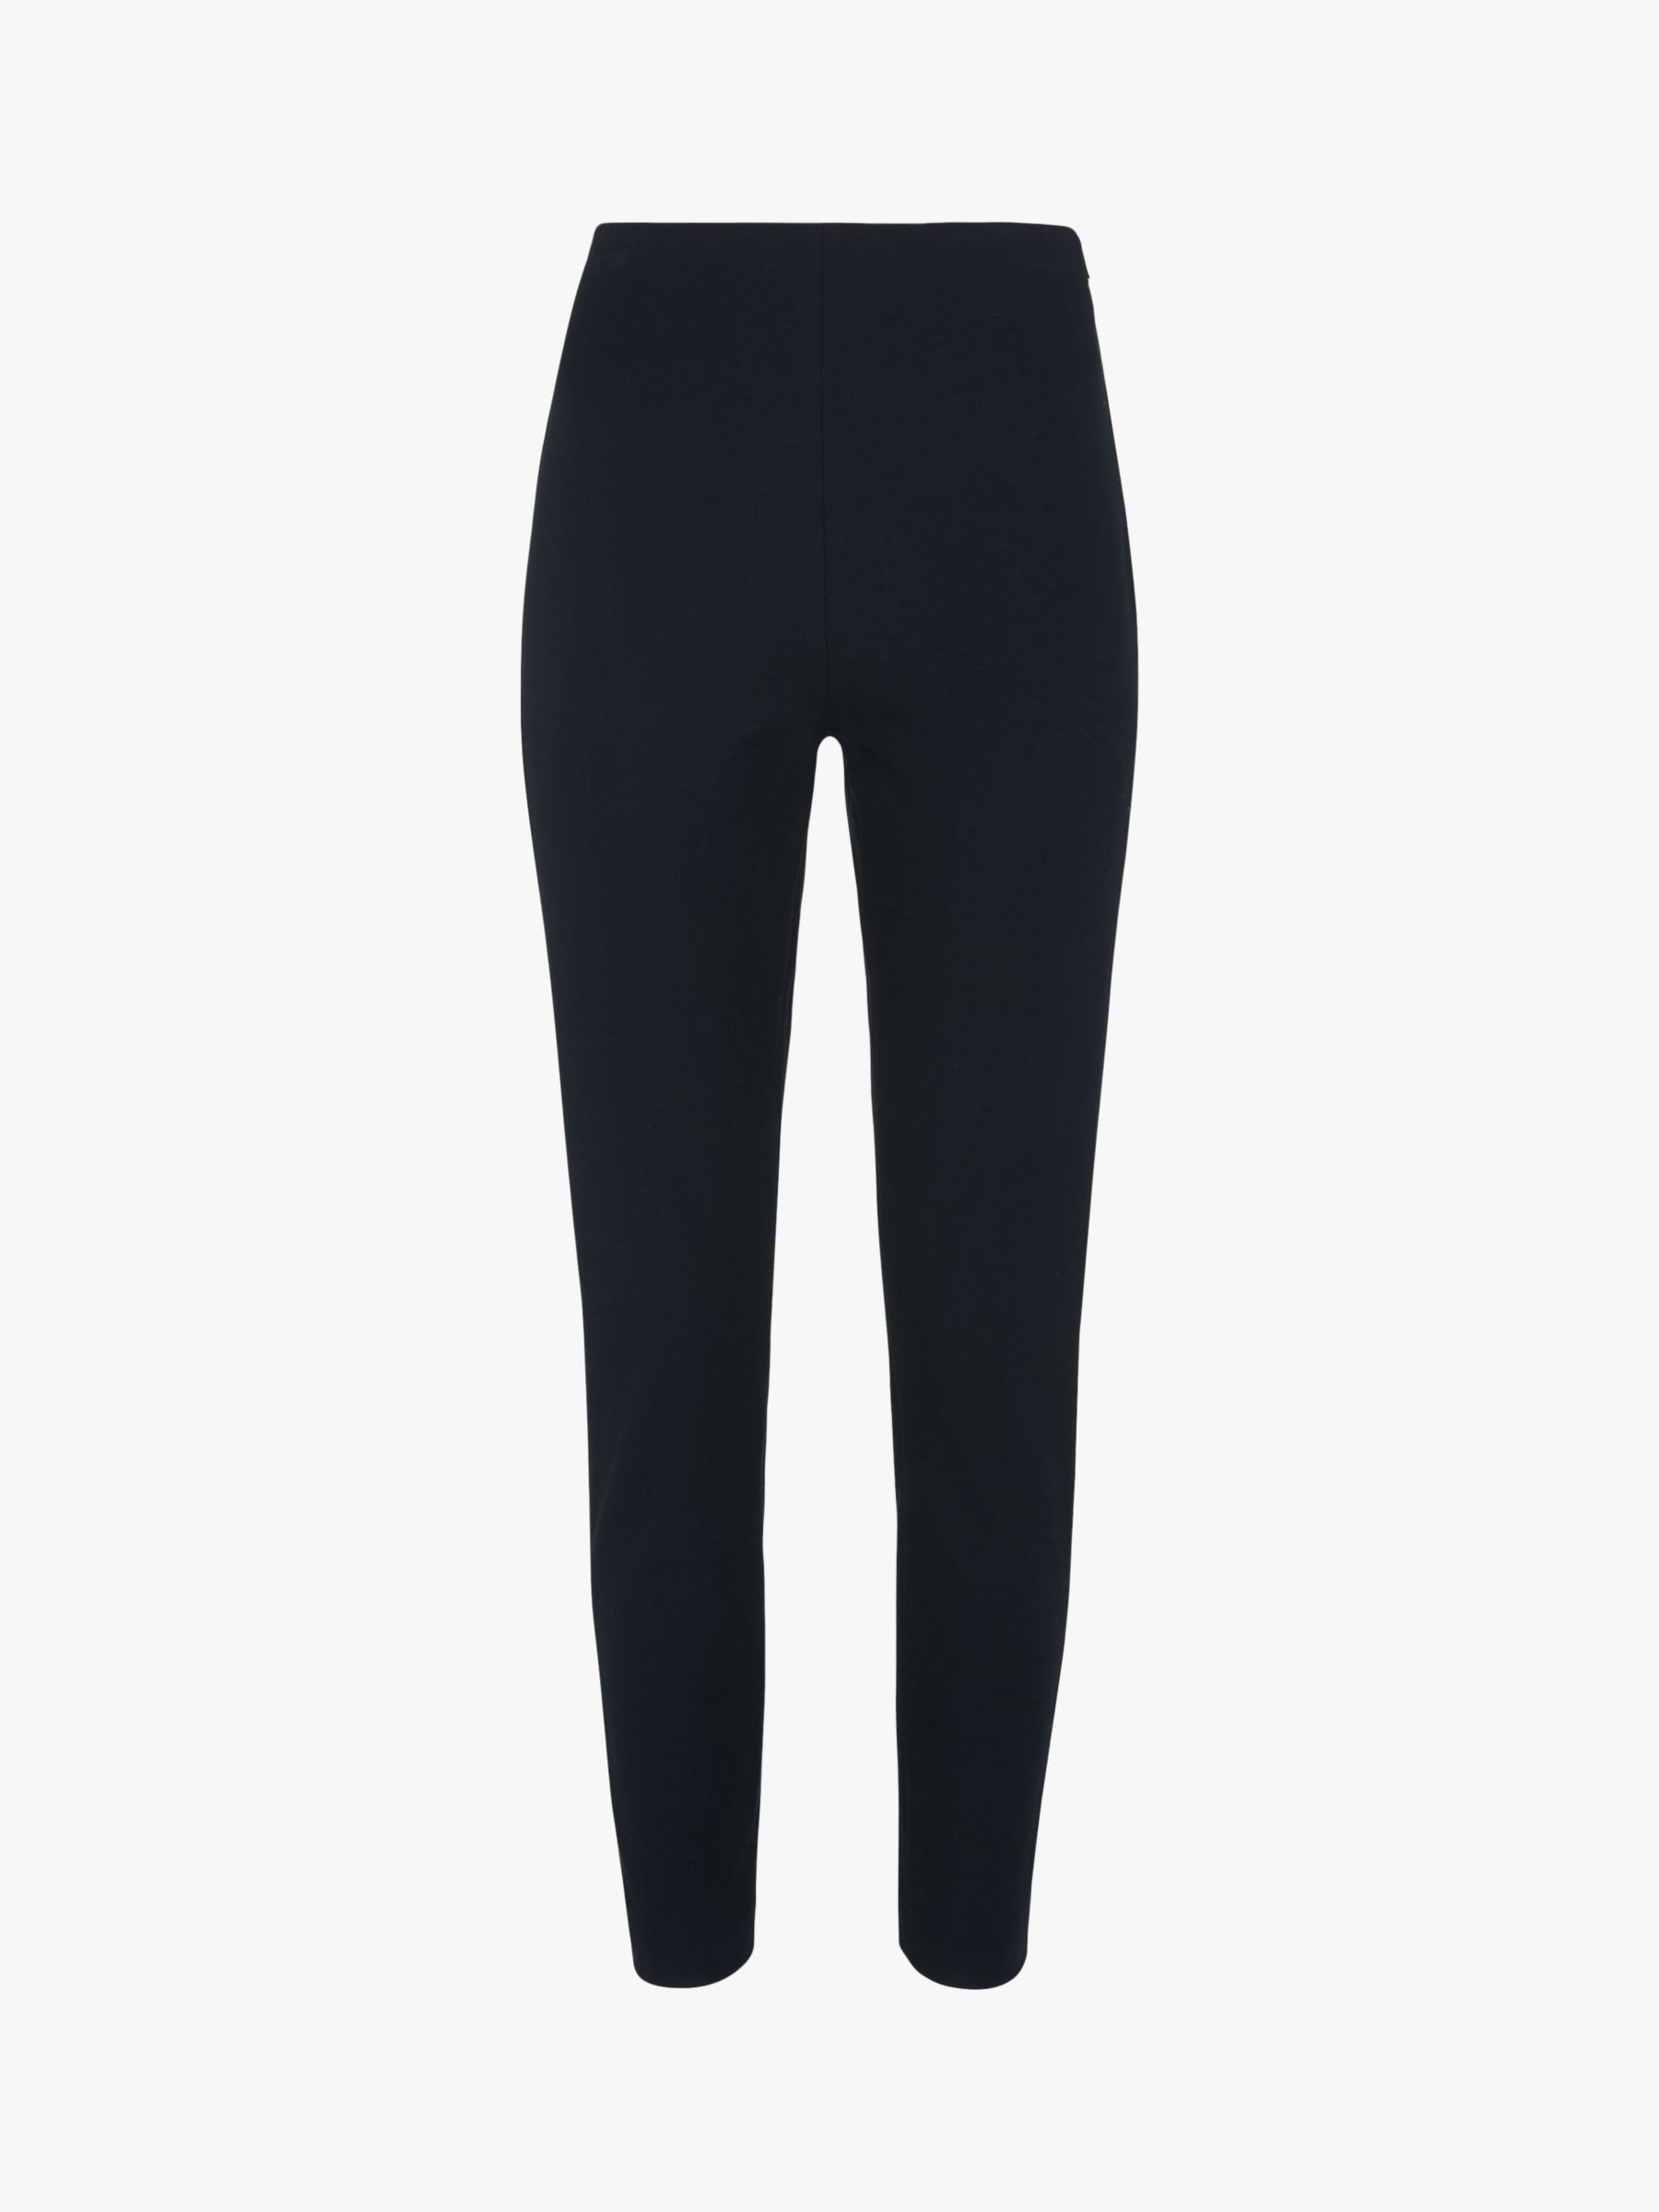 Whistles Petite Super Stretch Trousers, Navy, 6